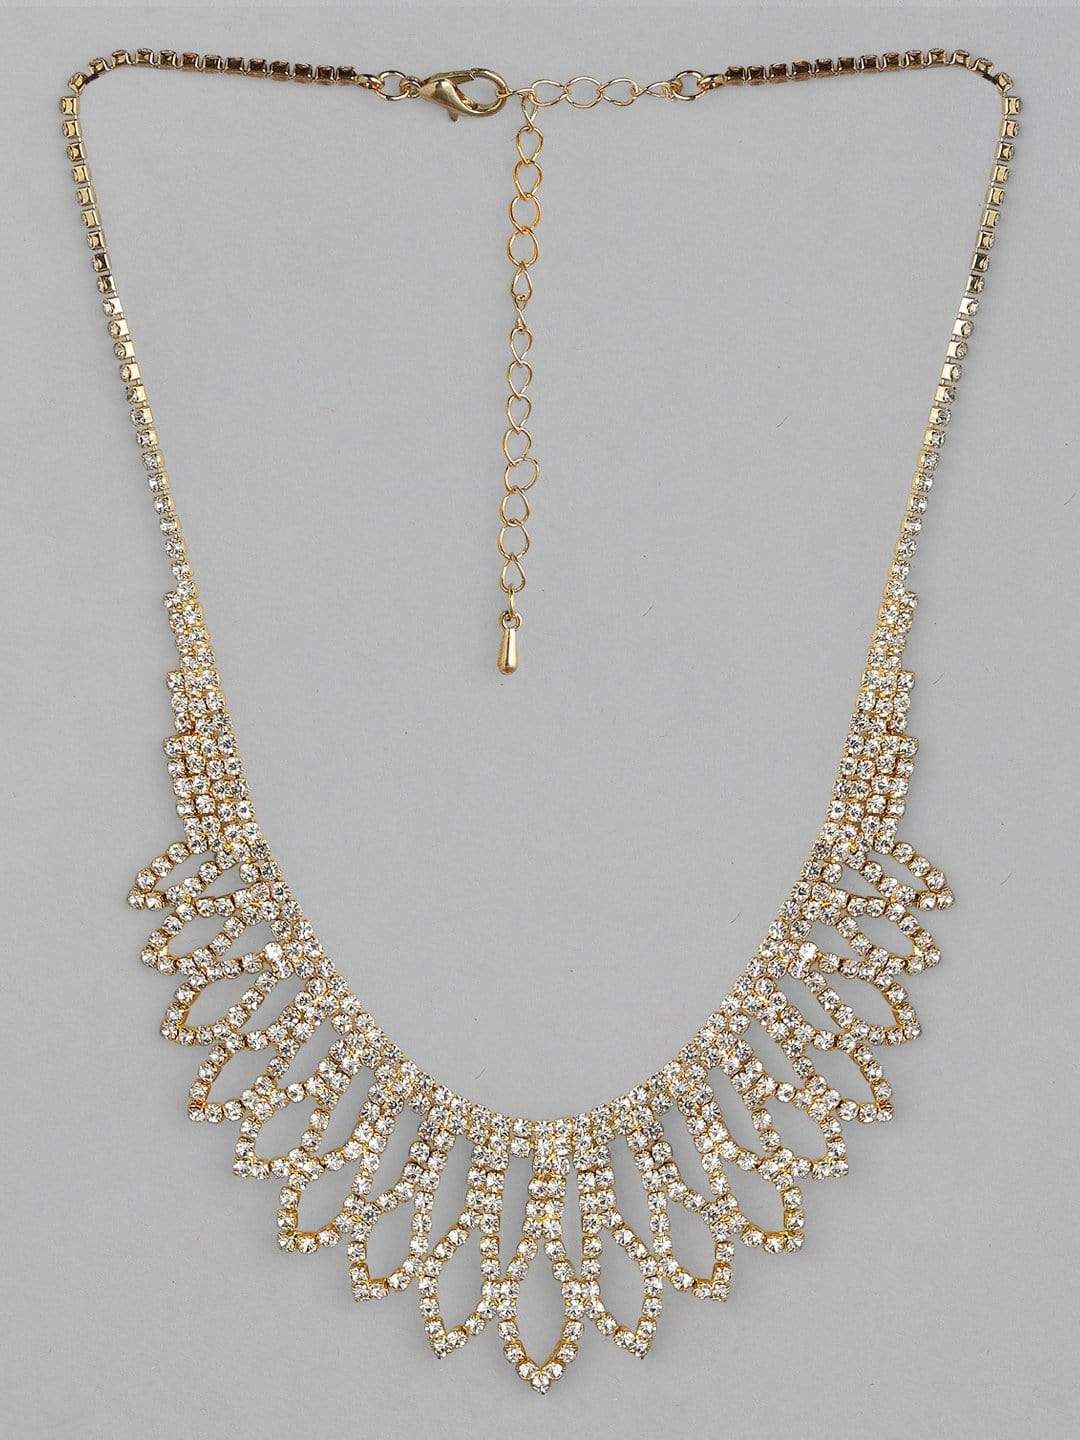 Remy Rhinestone Drop Necklace – The Songbird Collection